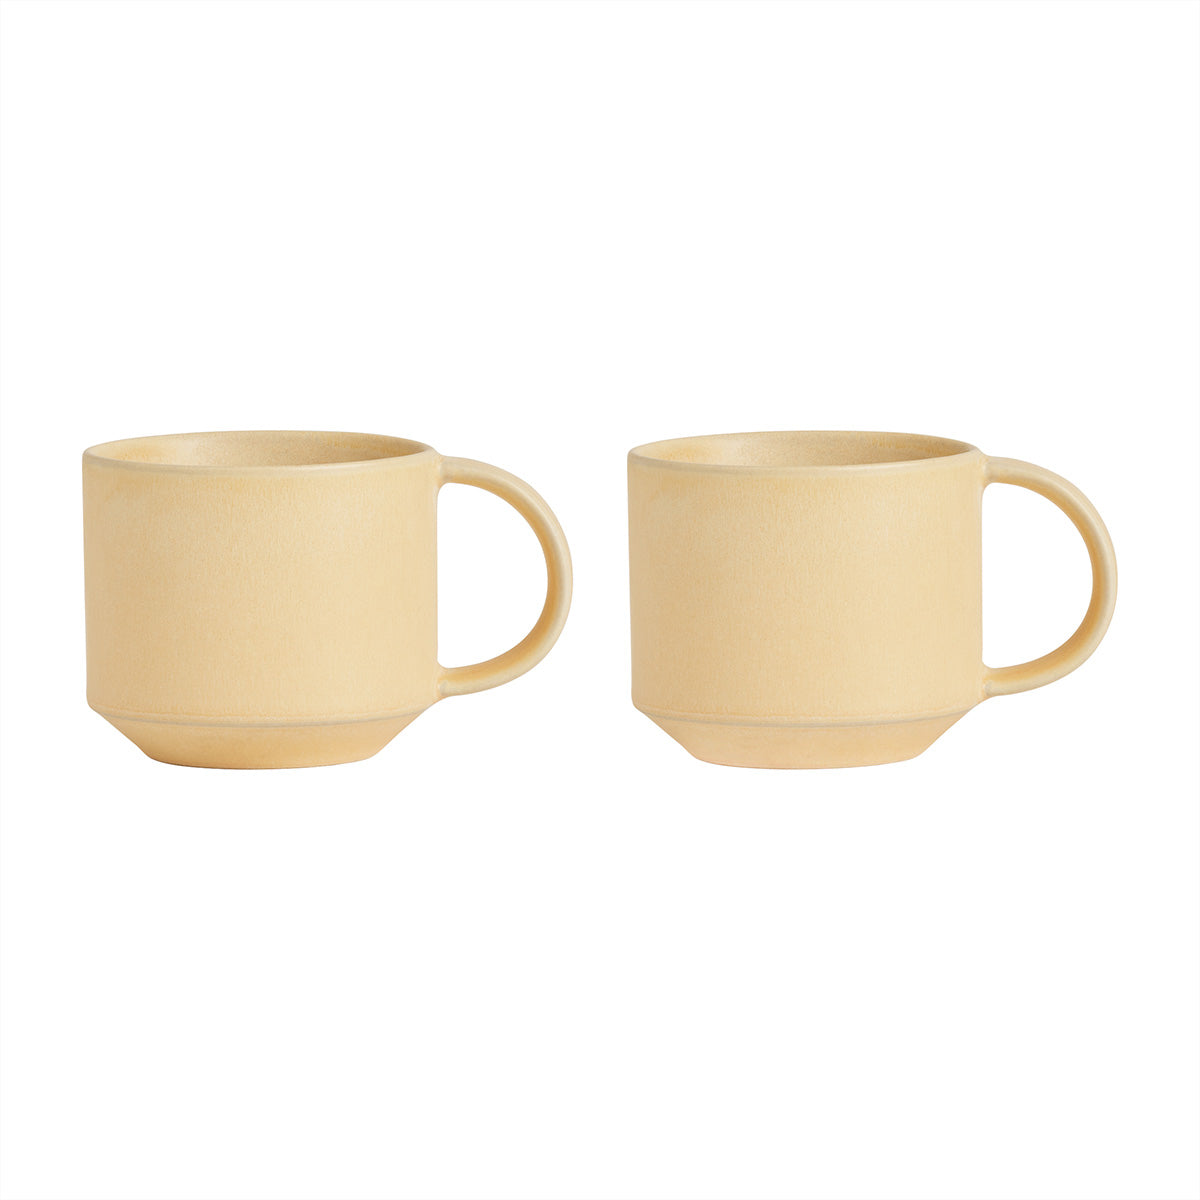 OYOY LIVING Yuka Cup - Pack of 2 Cup 806 Butter